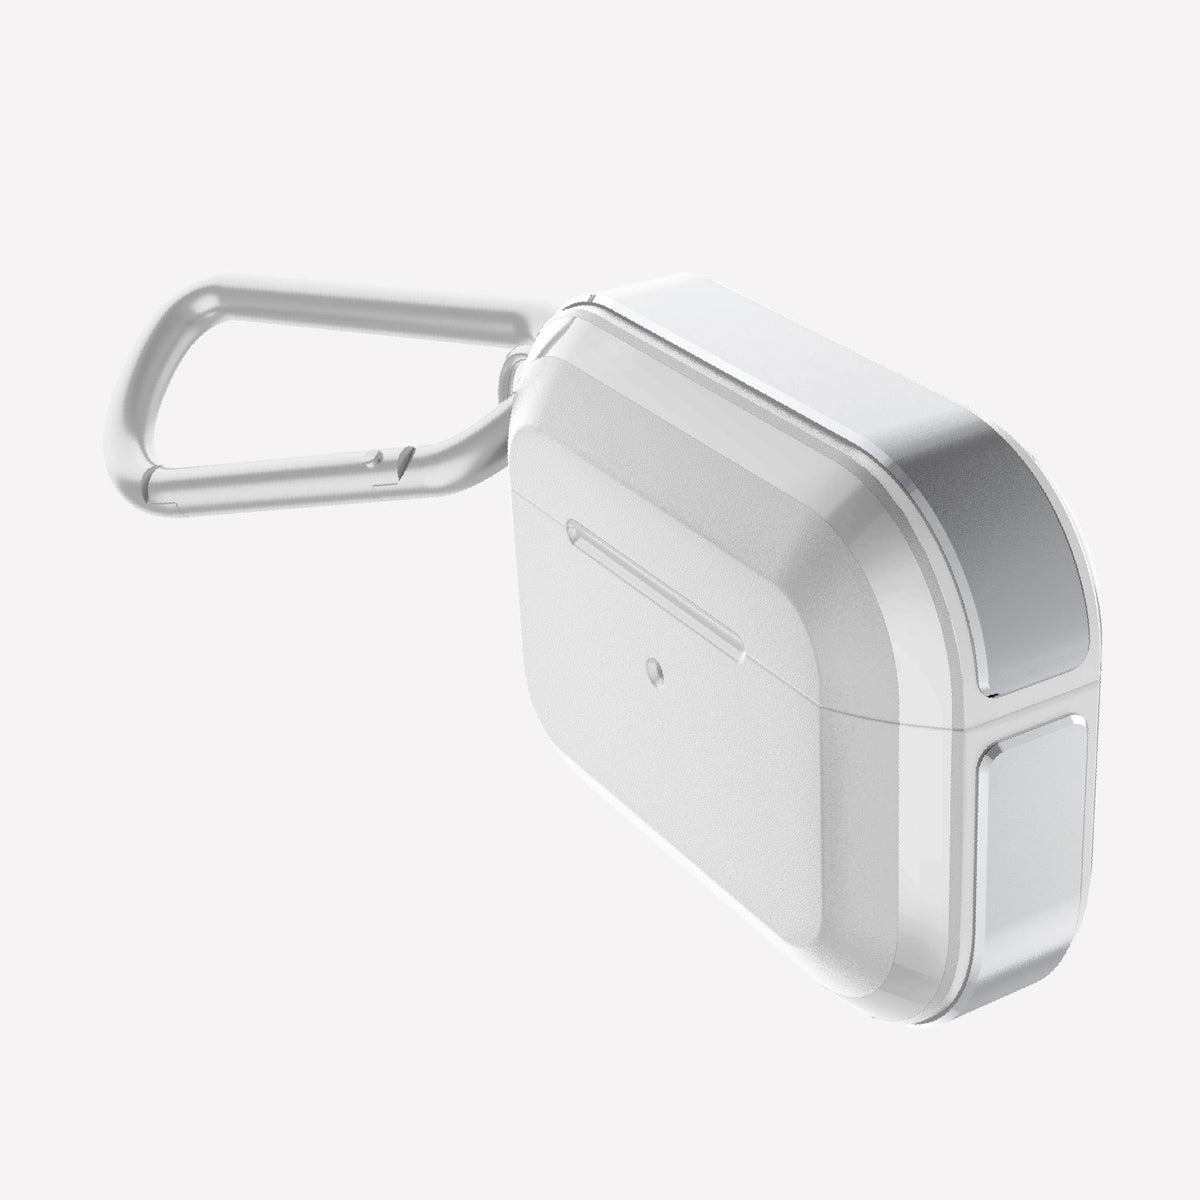 A sleek Raptic Apple AirPods Pro Case - TREK featuring wireless charging, placed on a pristine white surface.